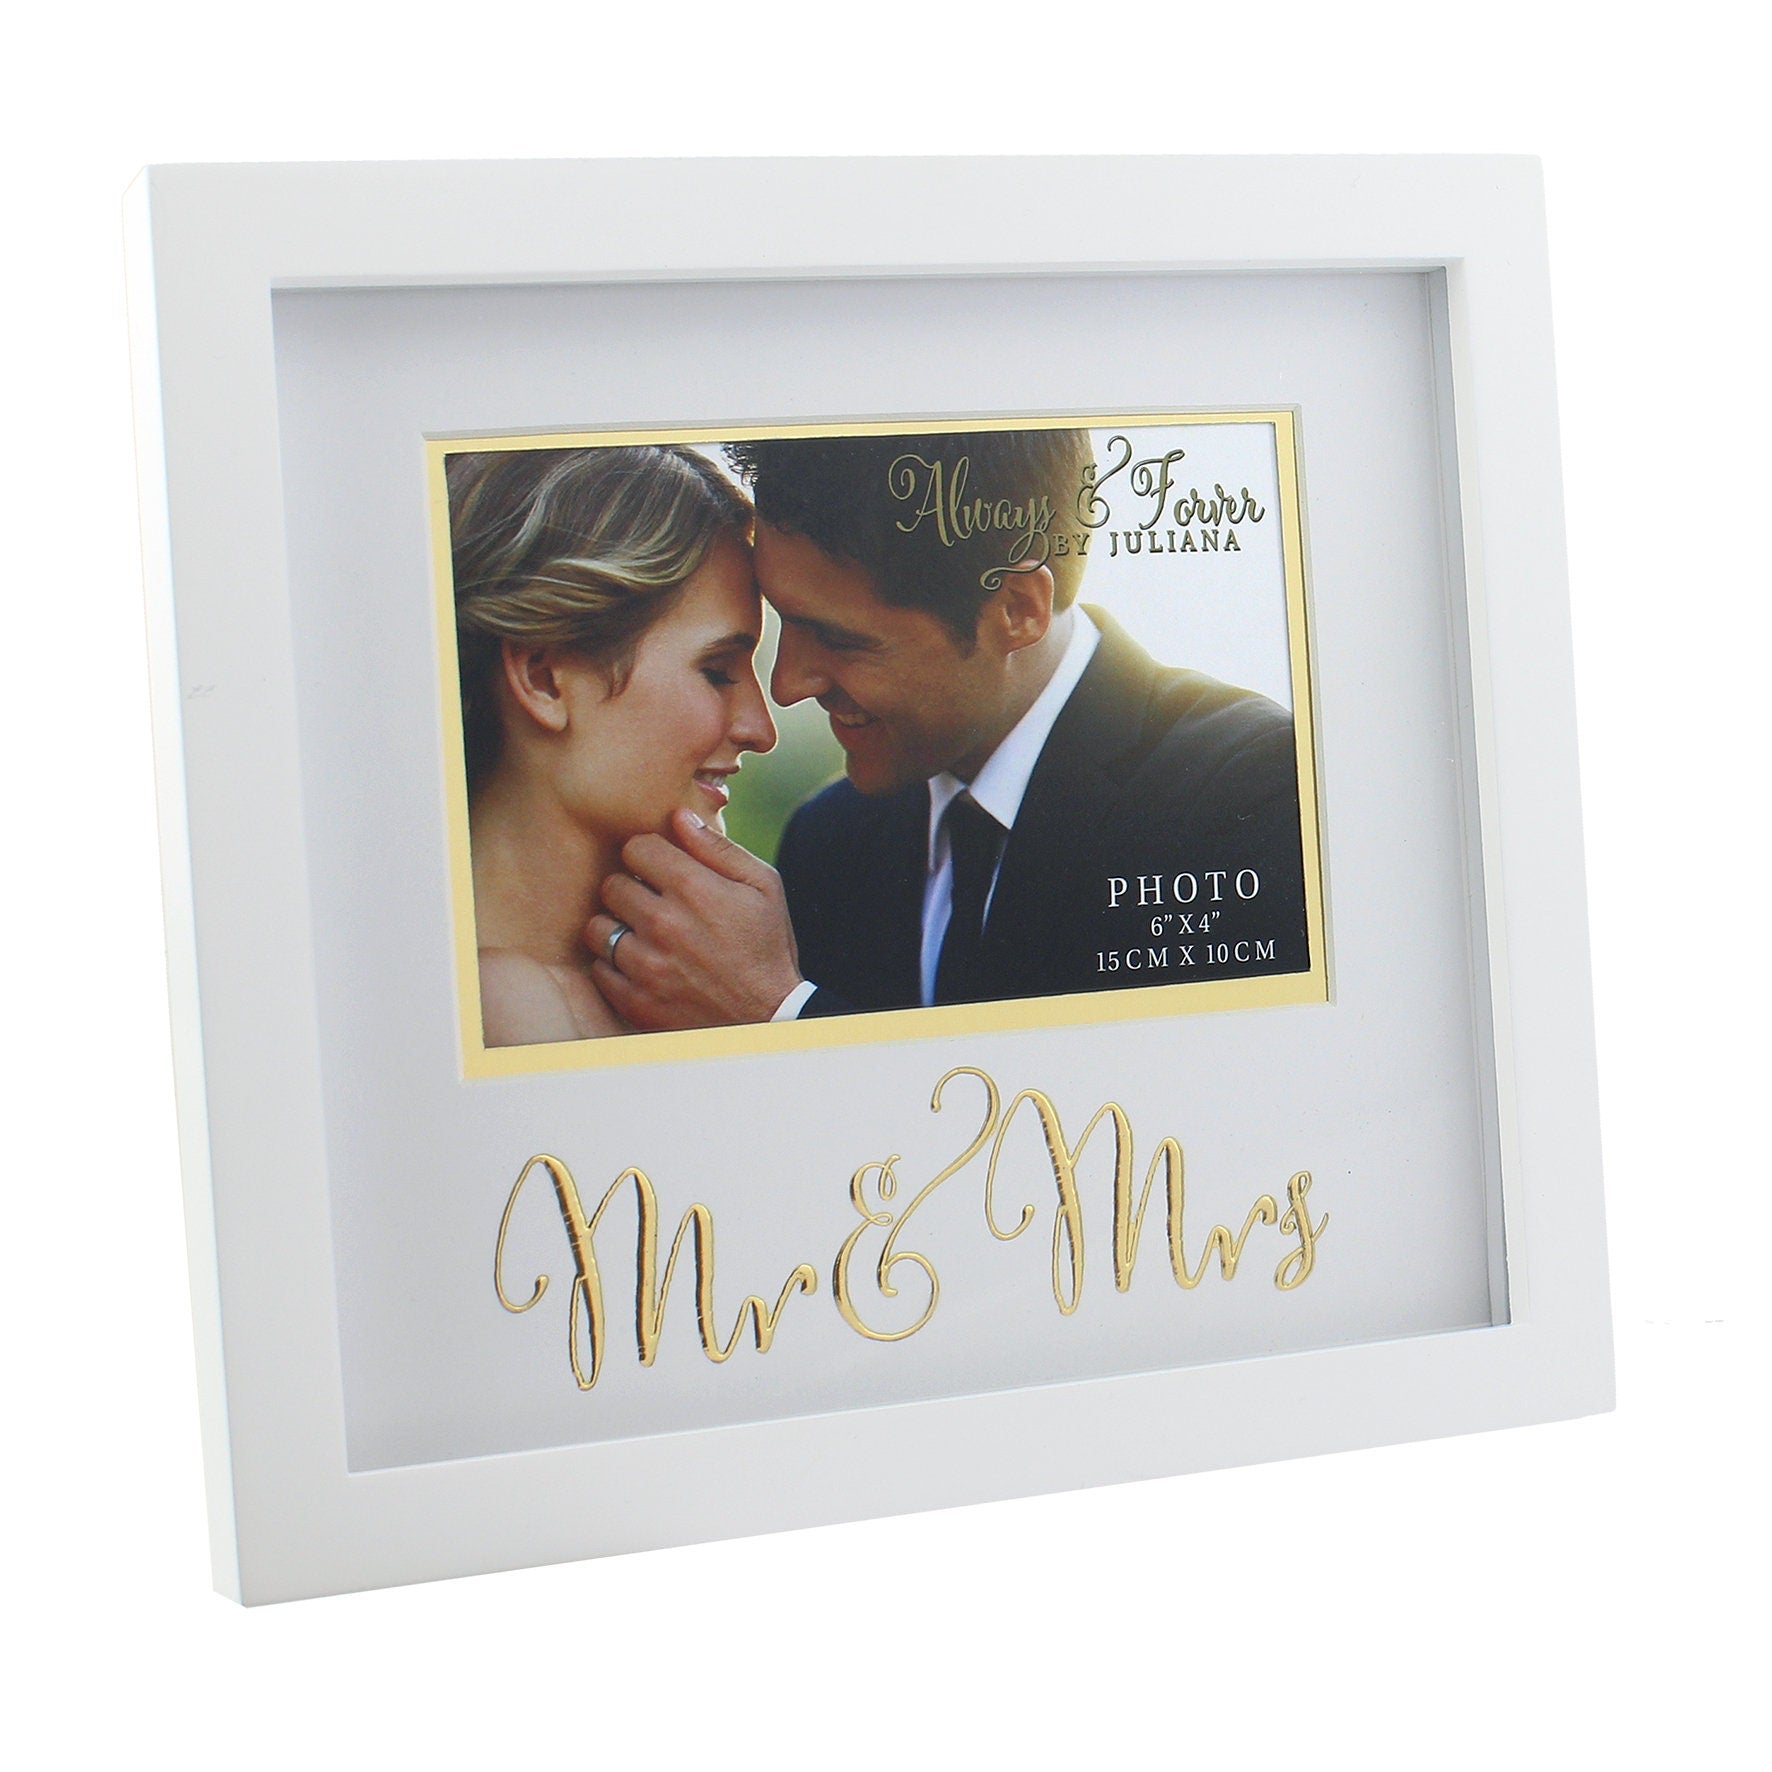 Mr & Mrs Photo Frame in White and Gold